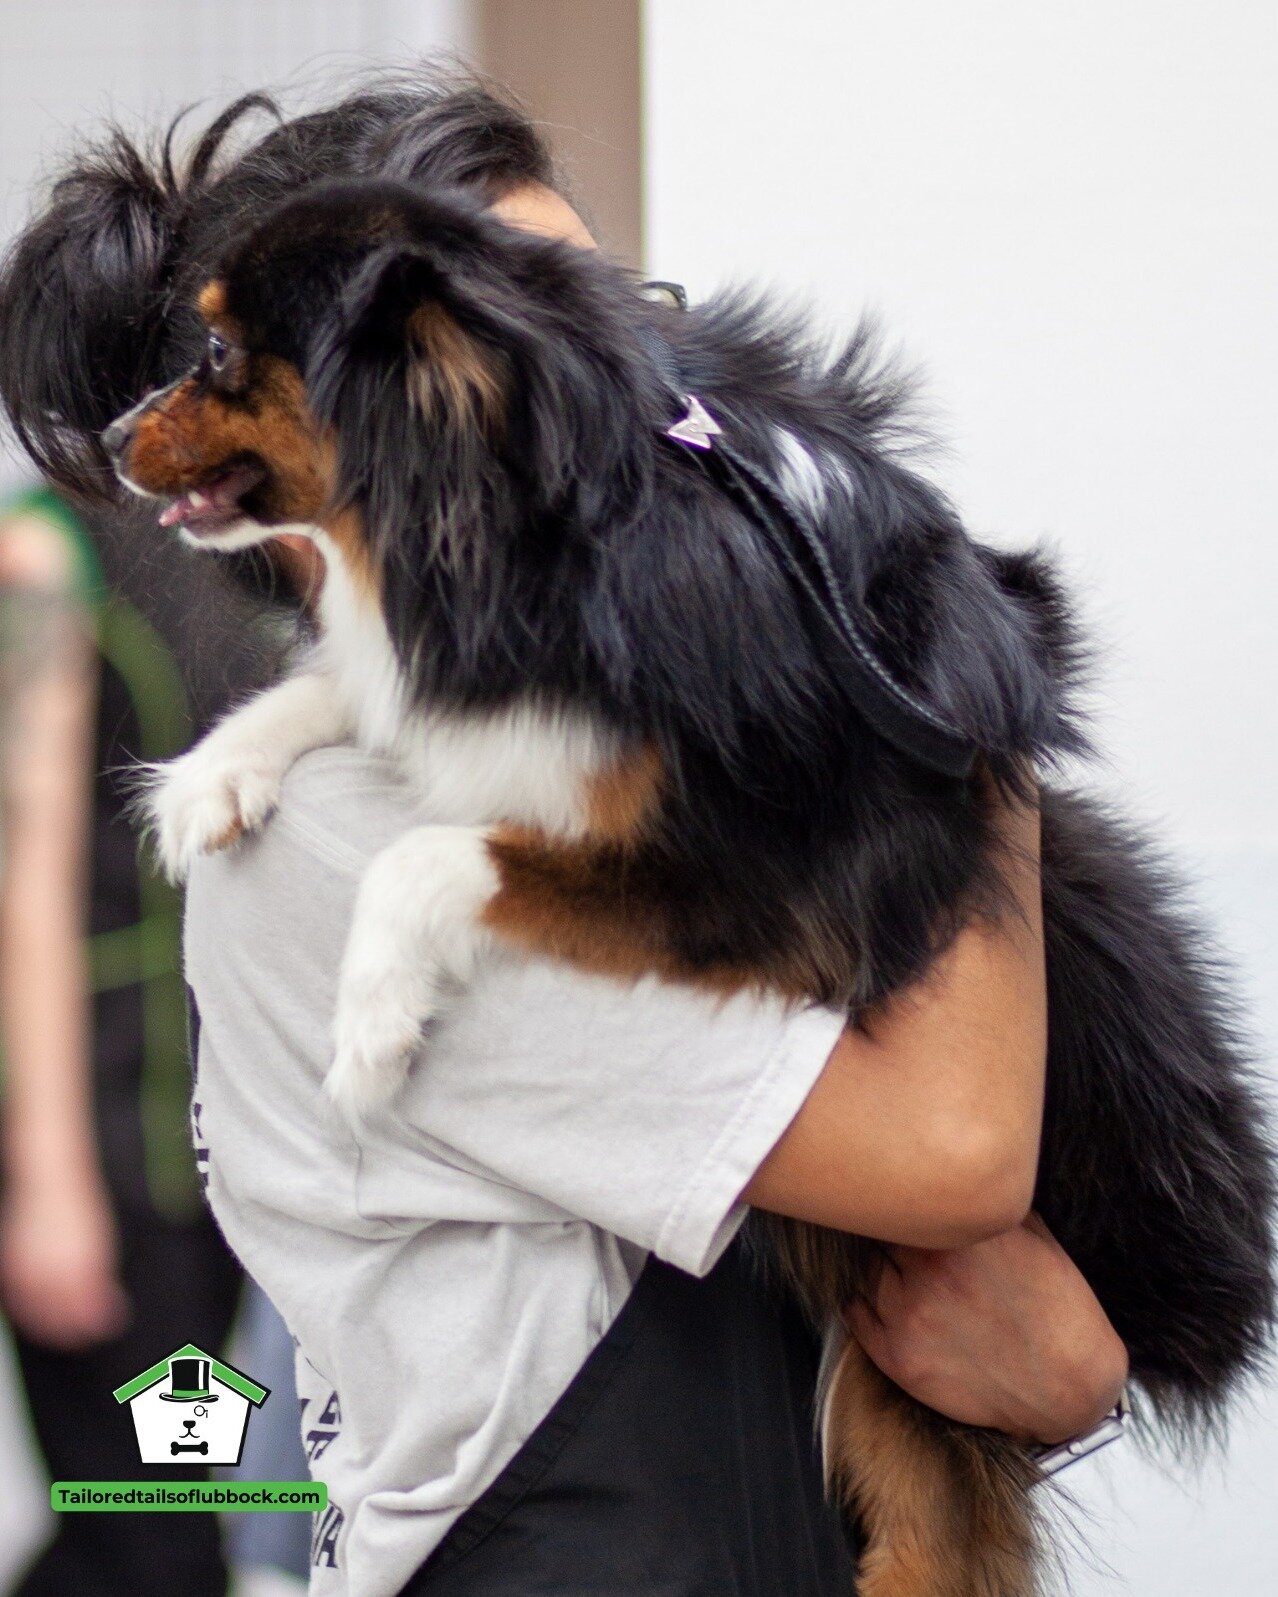 Every wag, every lick, every cuddle &ndash; it's what makes being a dog groomer the best job in the world! 🐕❤️ #GroomingJoy #tailoredtailsoflubbock #dogsoflubbck #doggroominglubbock #SmallBusinessLubbock #bestofthewest2024 #dogowners